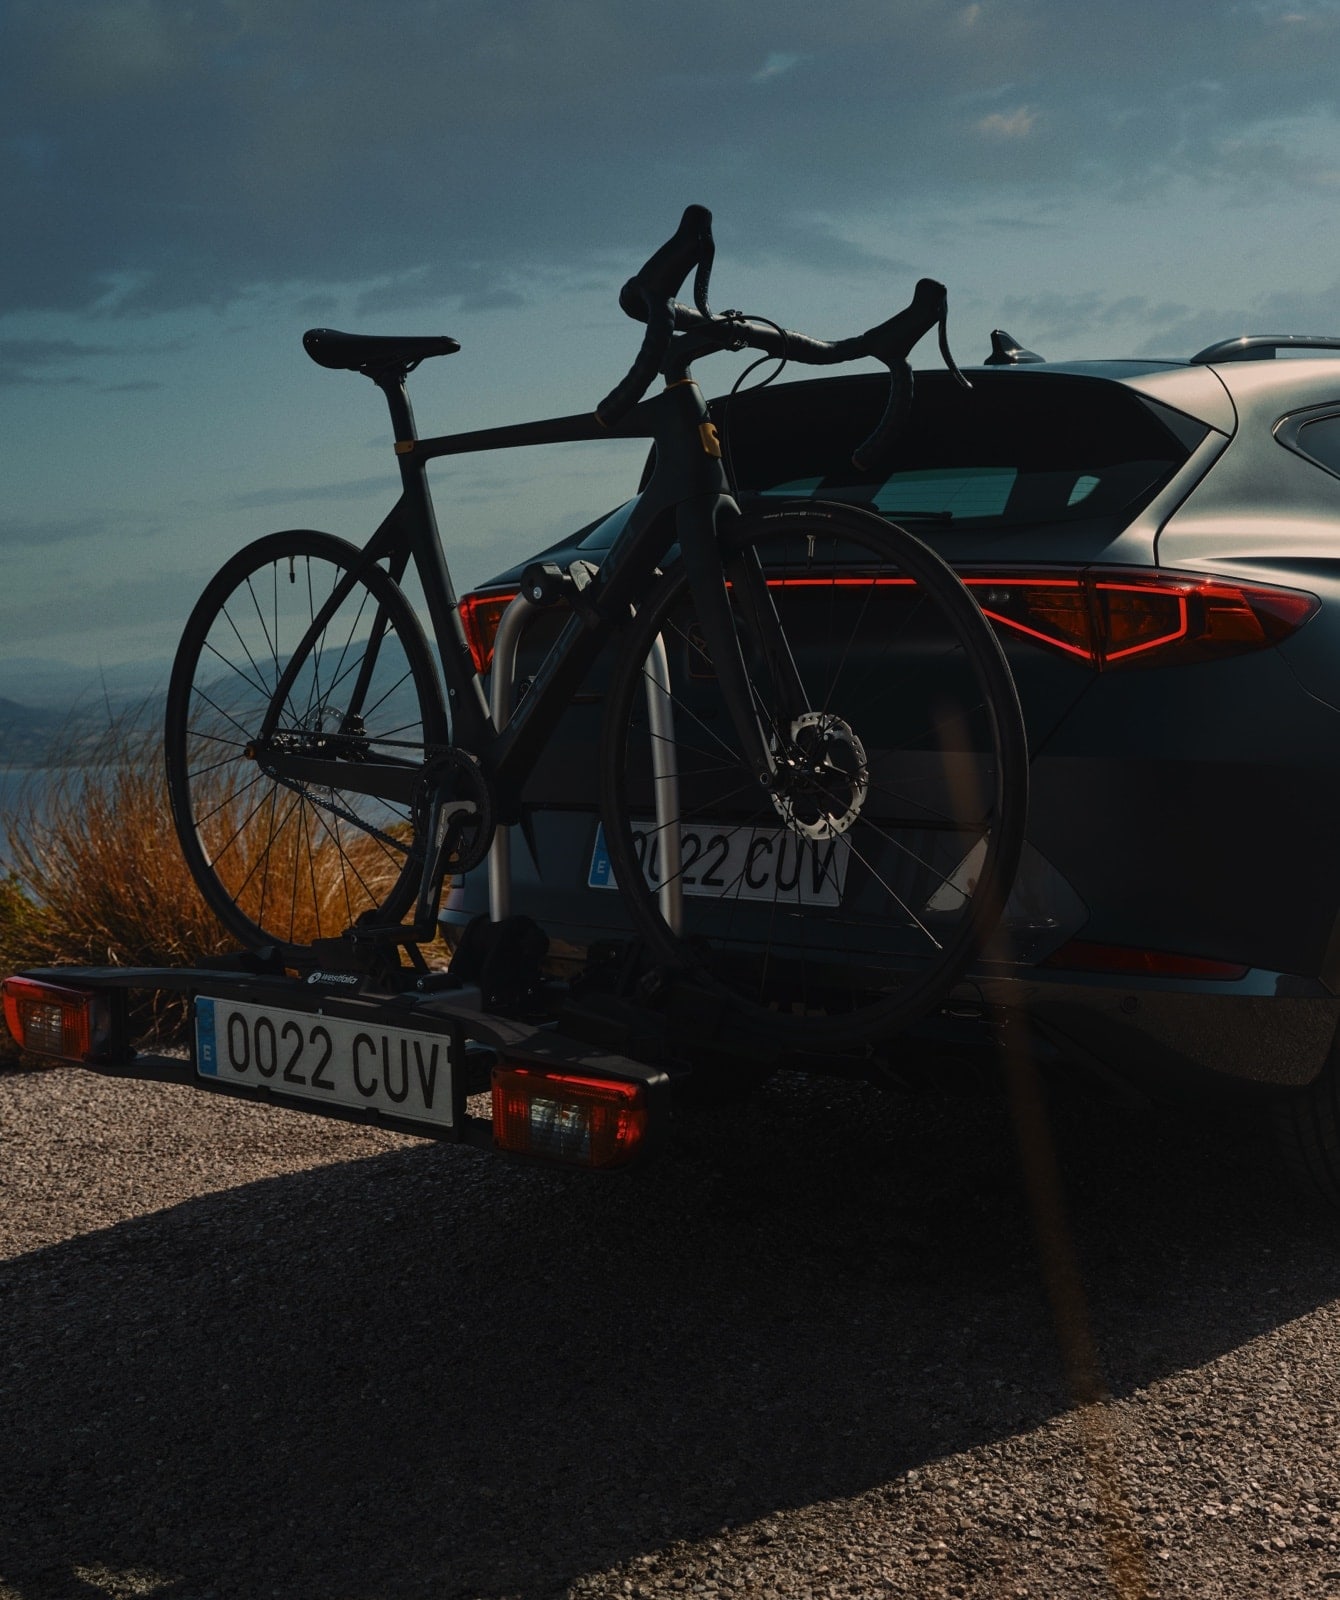 cupra-formentor-with-towing-bike-rack